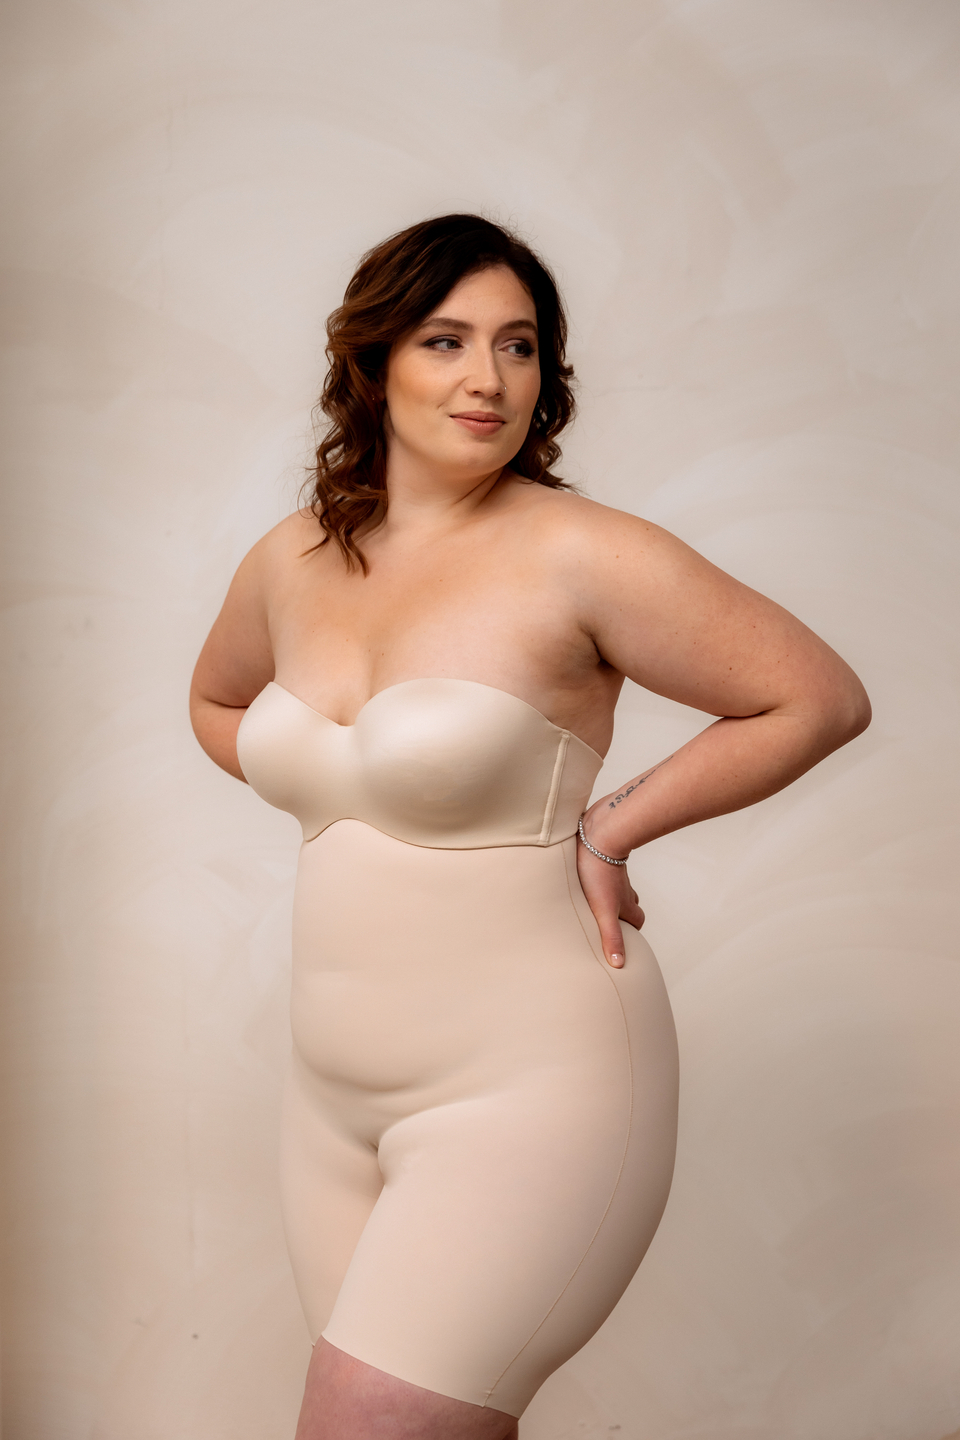 How to Find the Right Size Shapewear